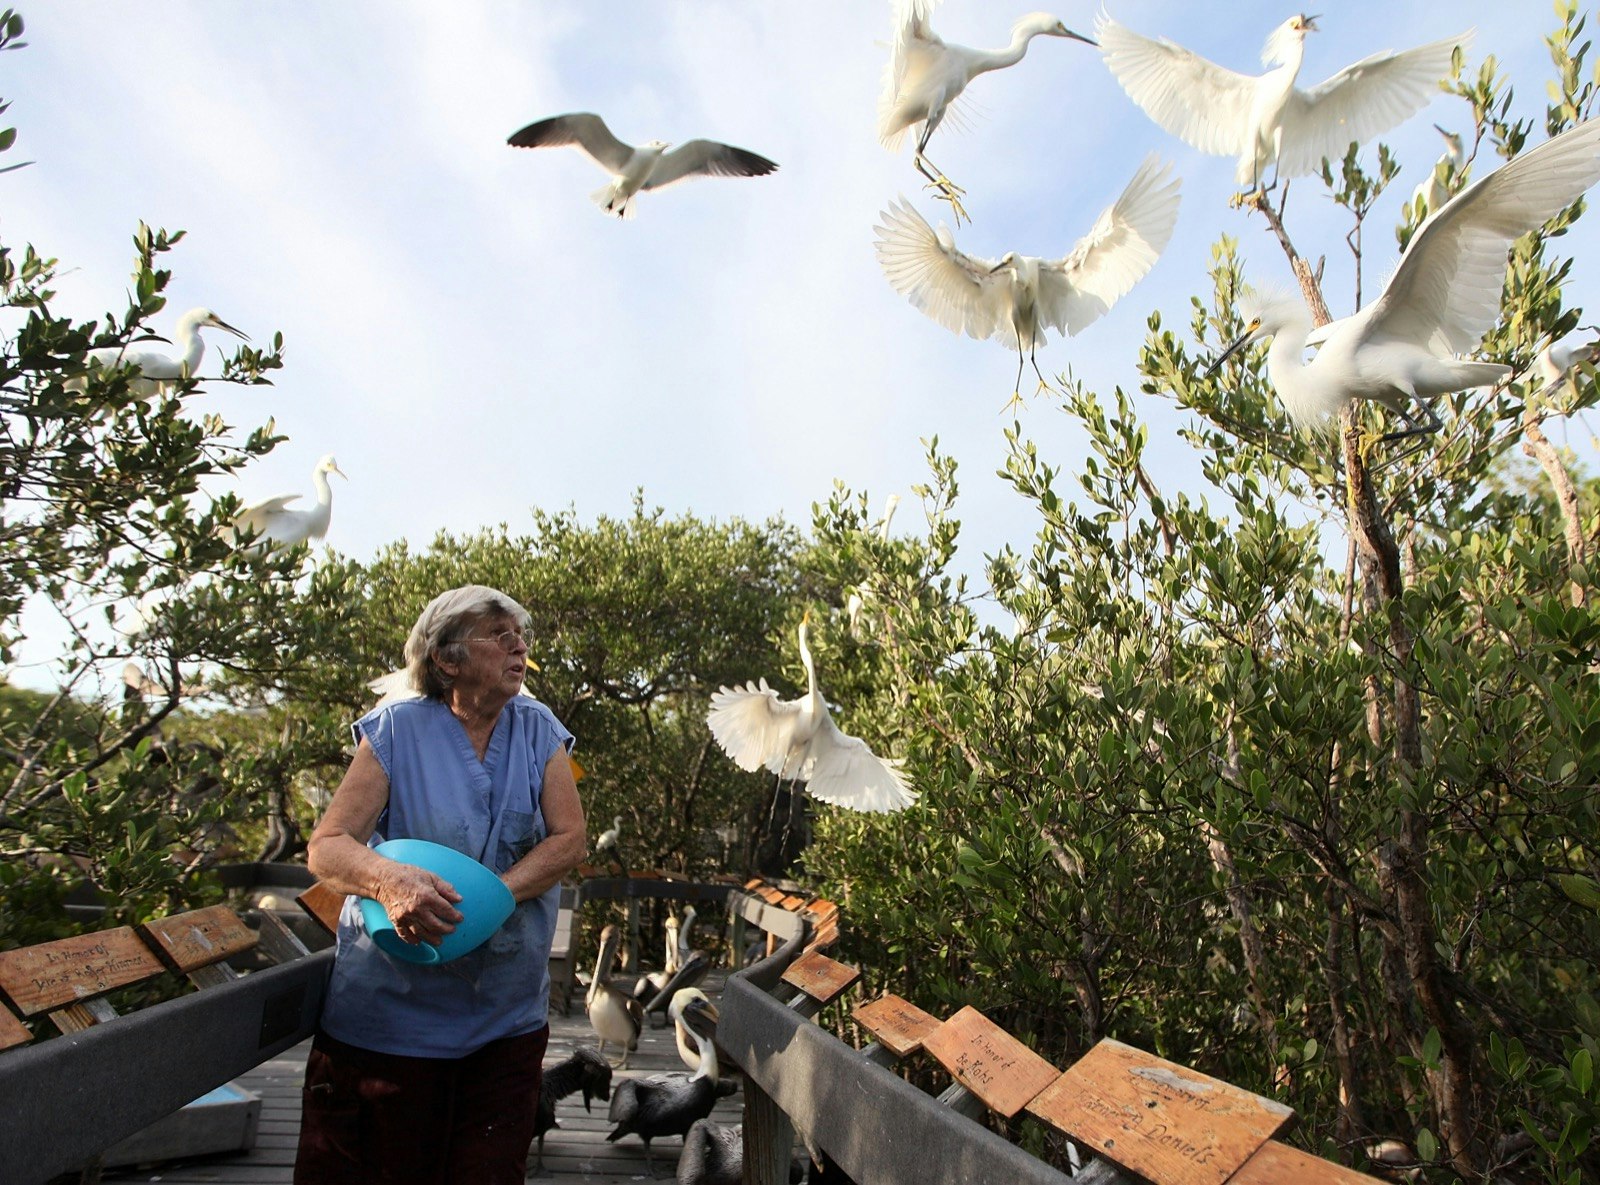 Woman feeds large white birds on a wooden deck